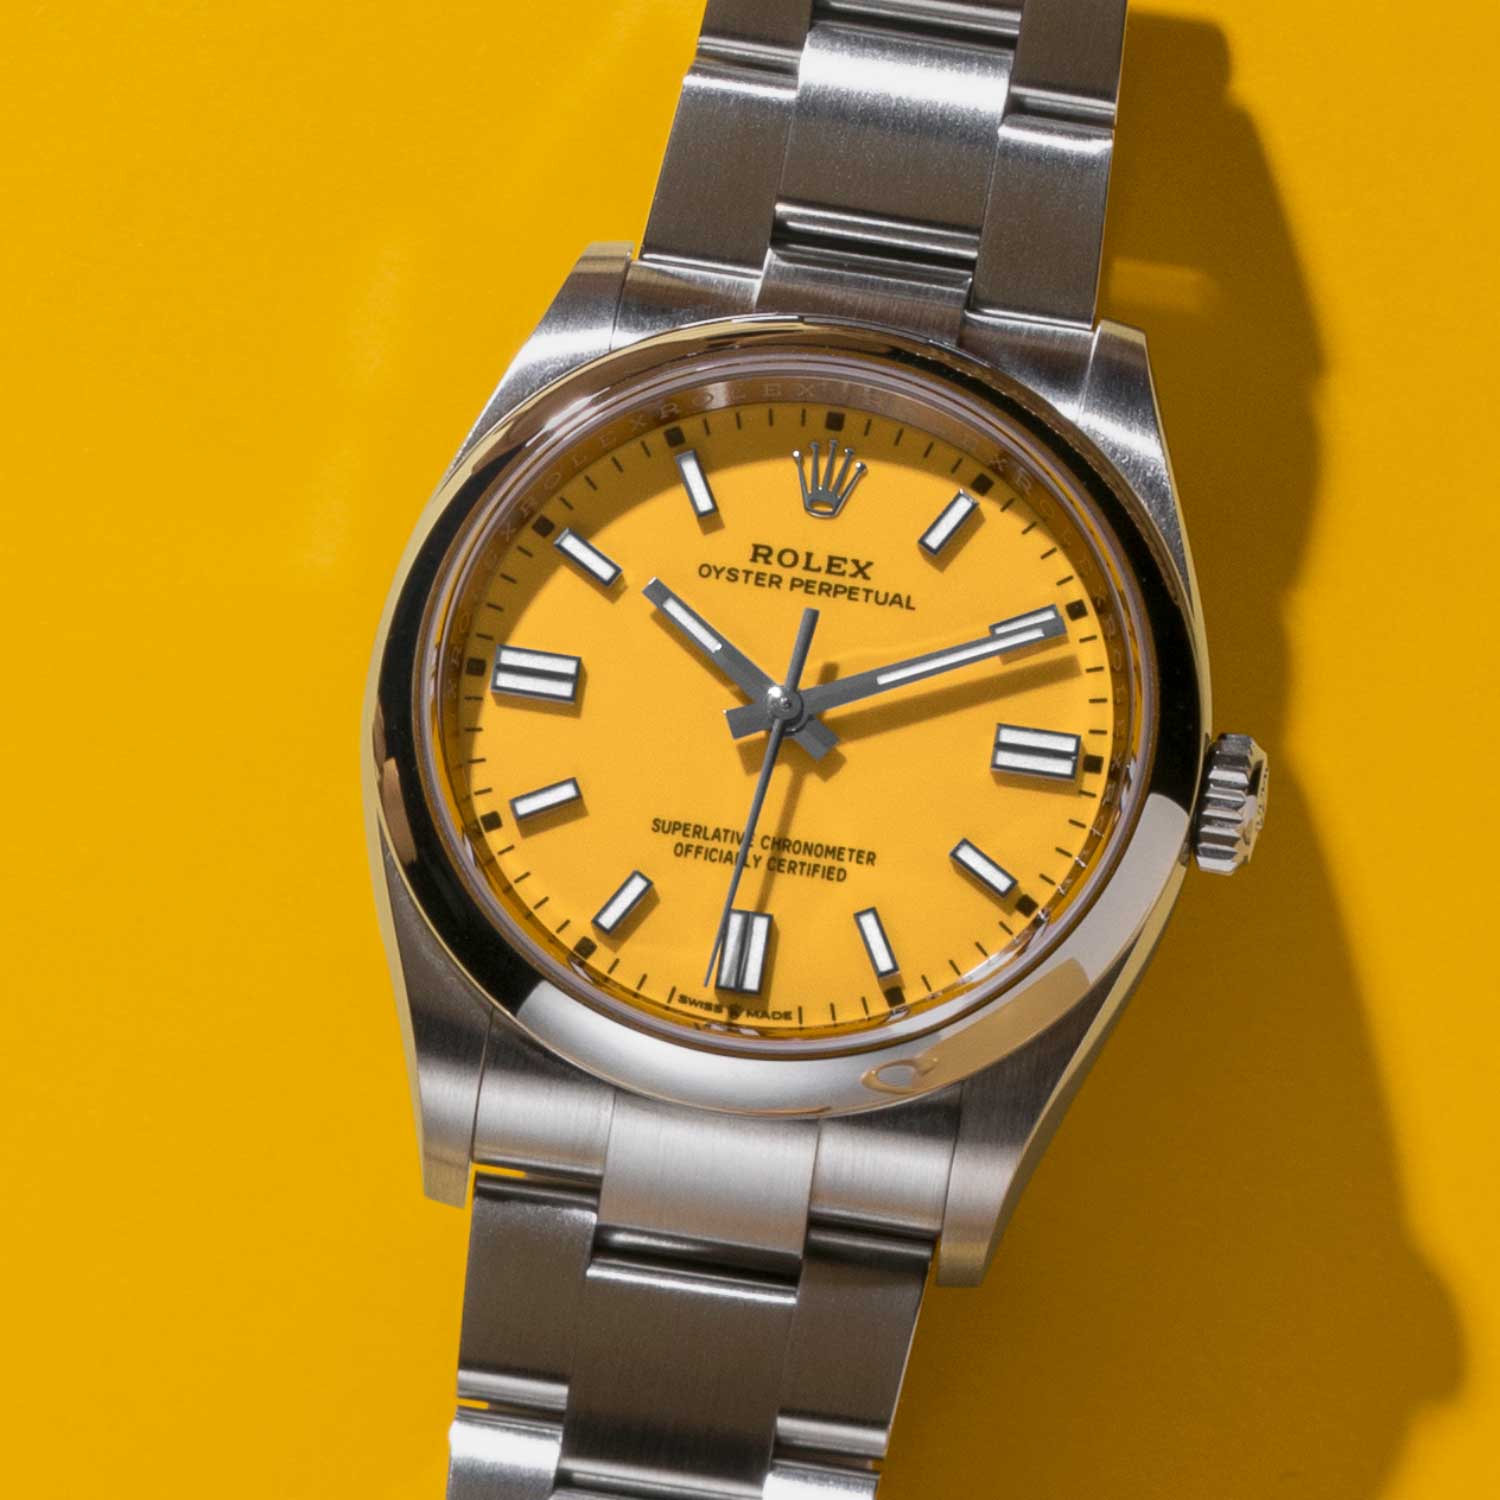 Rolex Oyster Perpetual 36 with a yellow dial and an Oyster bracelet.